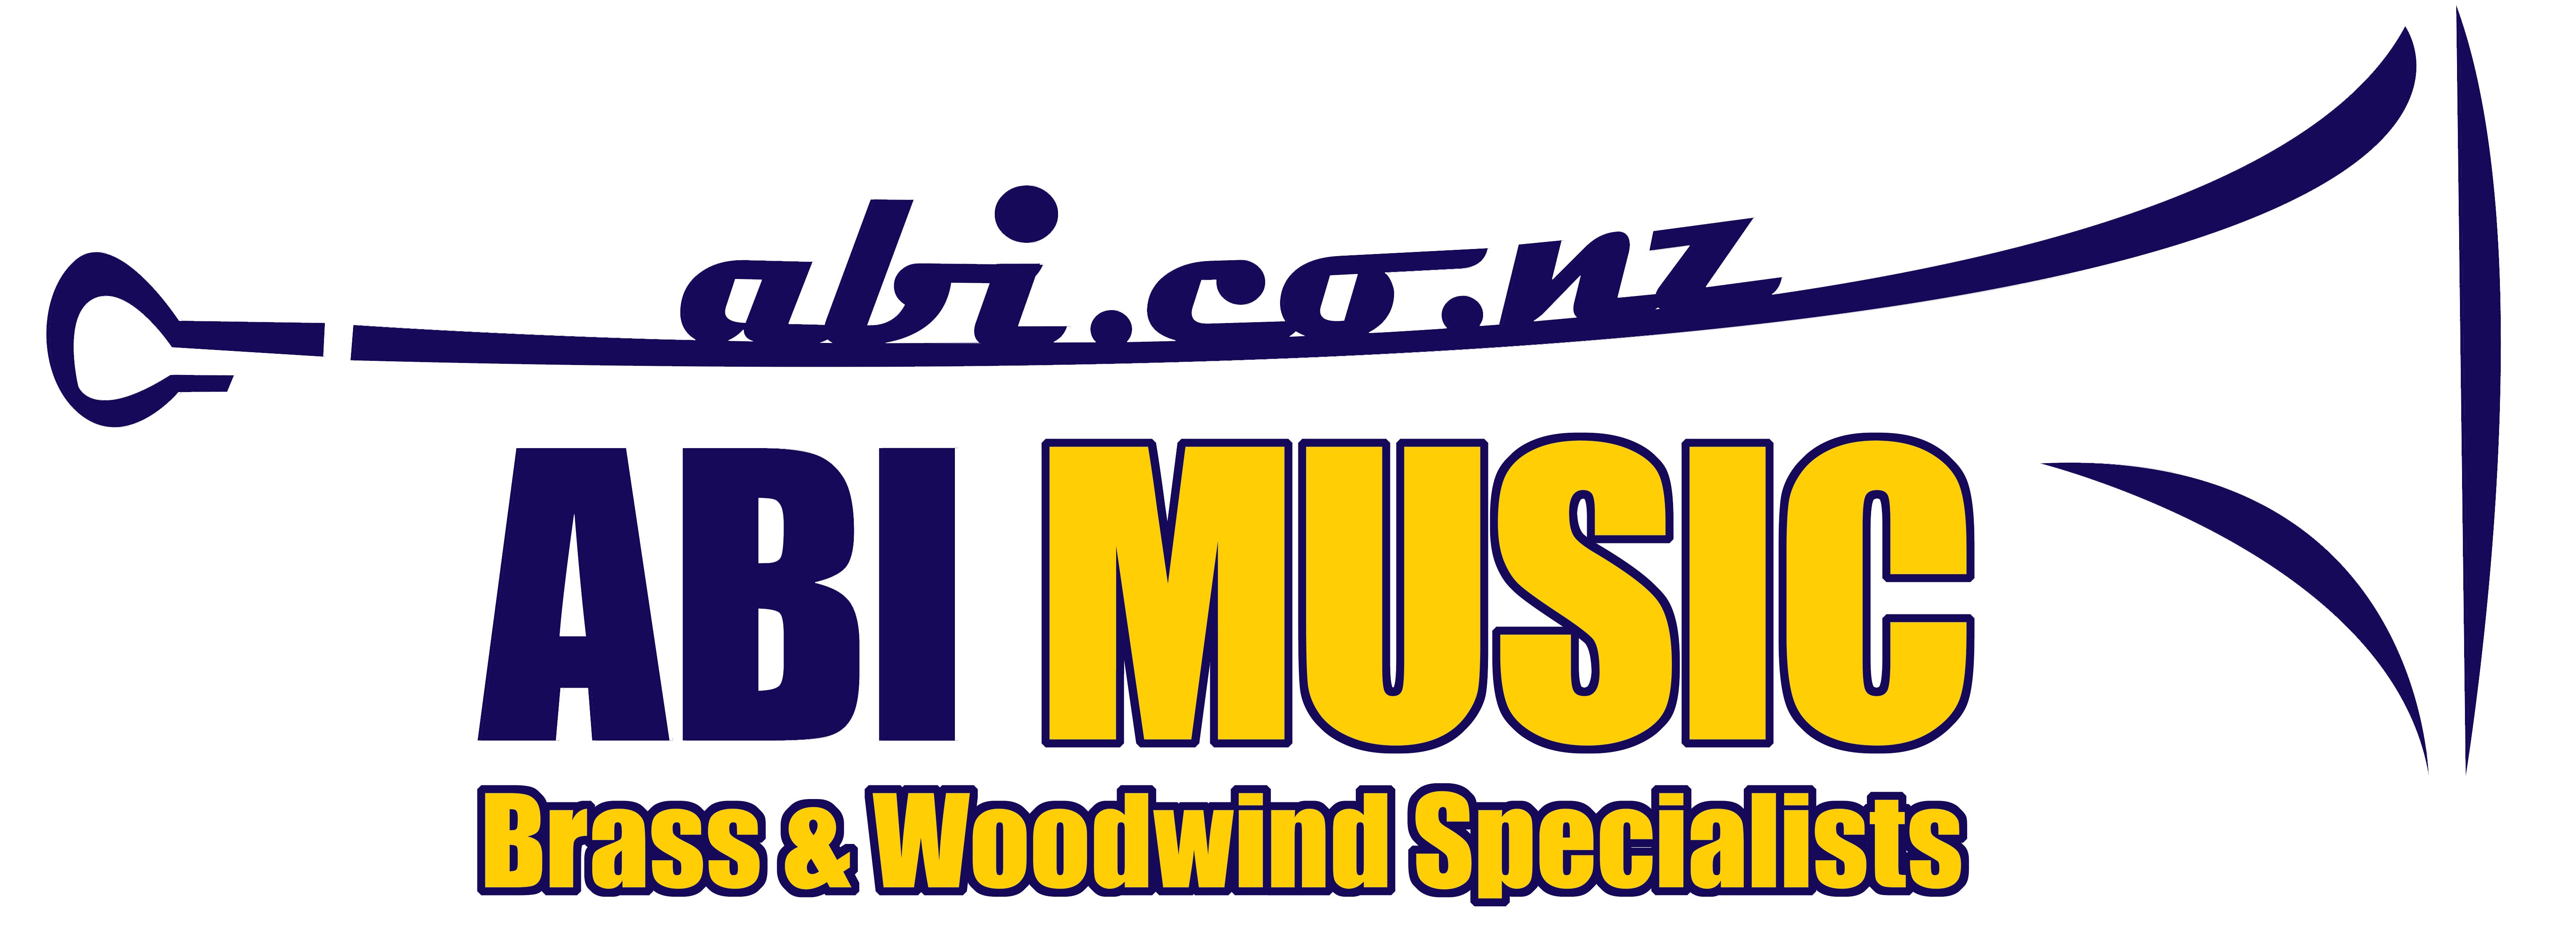 Brass Music Specialists – Brass and woodwind specialists including